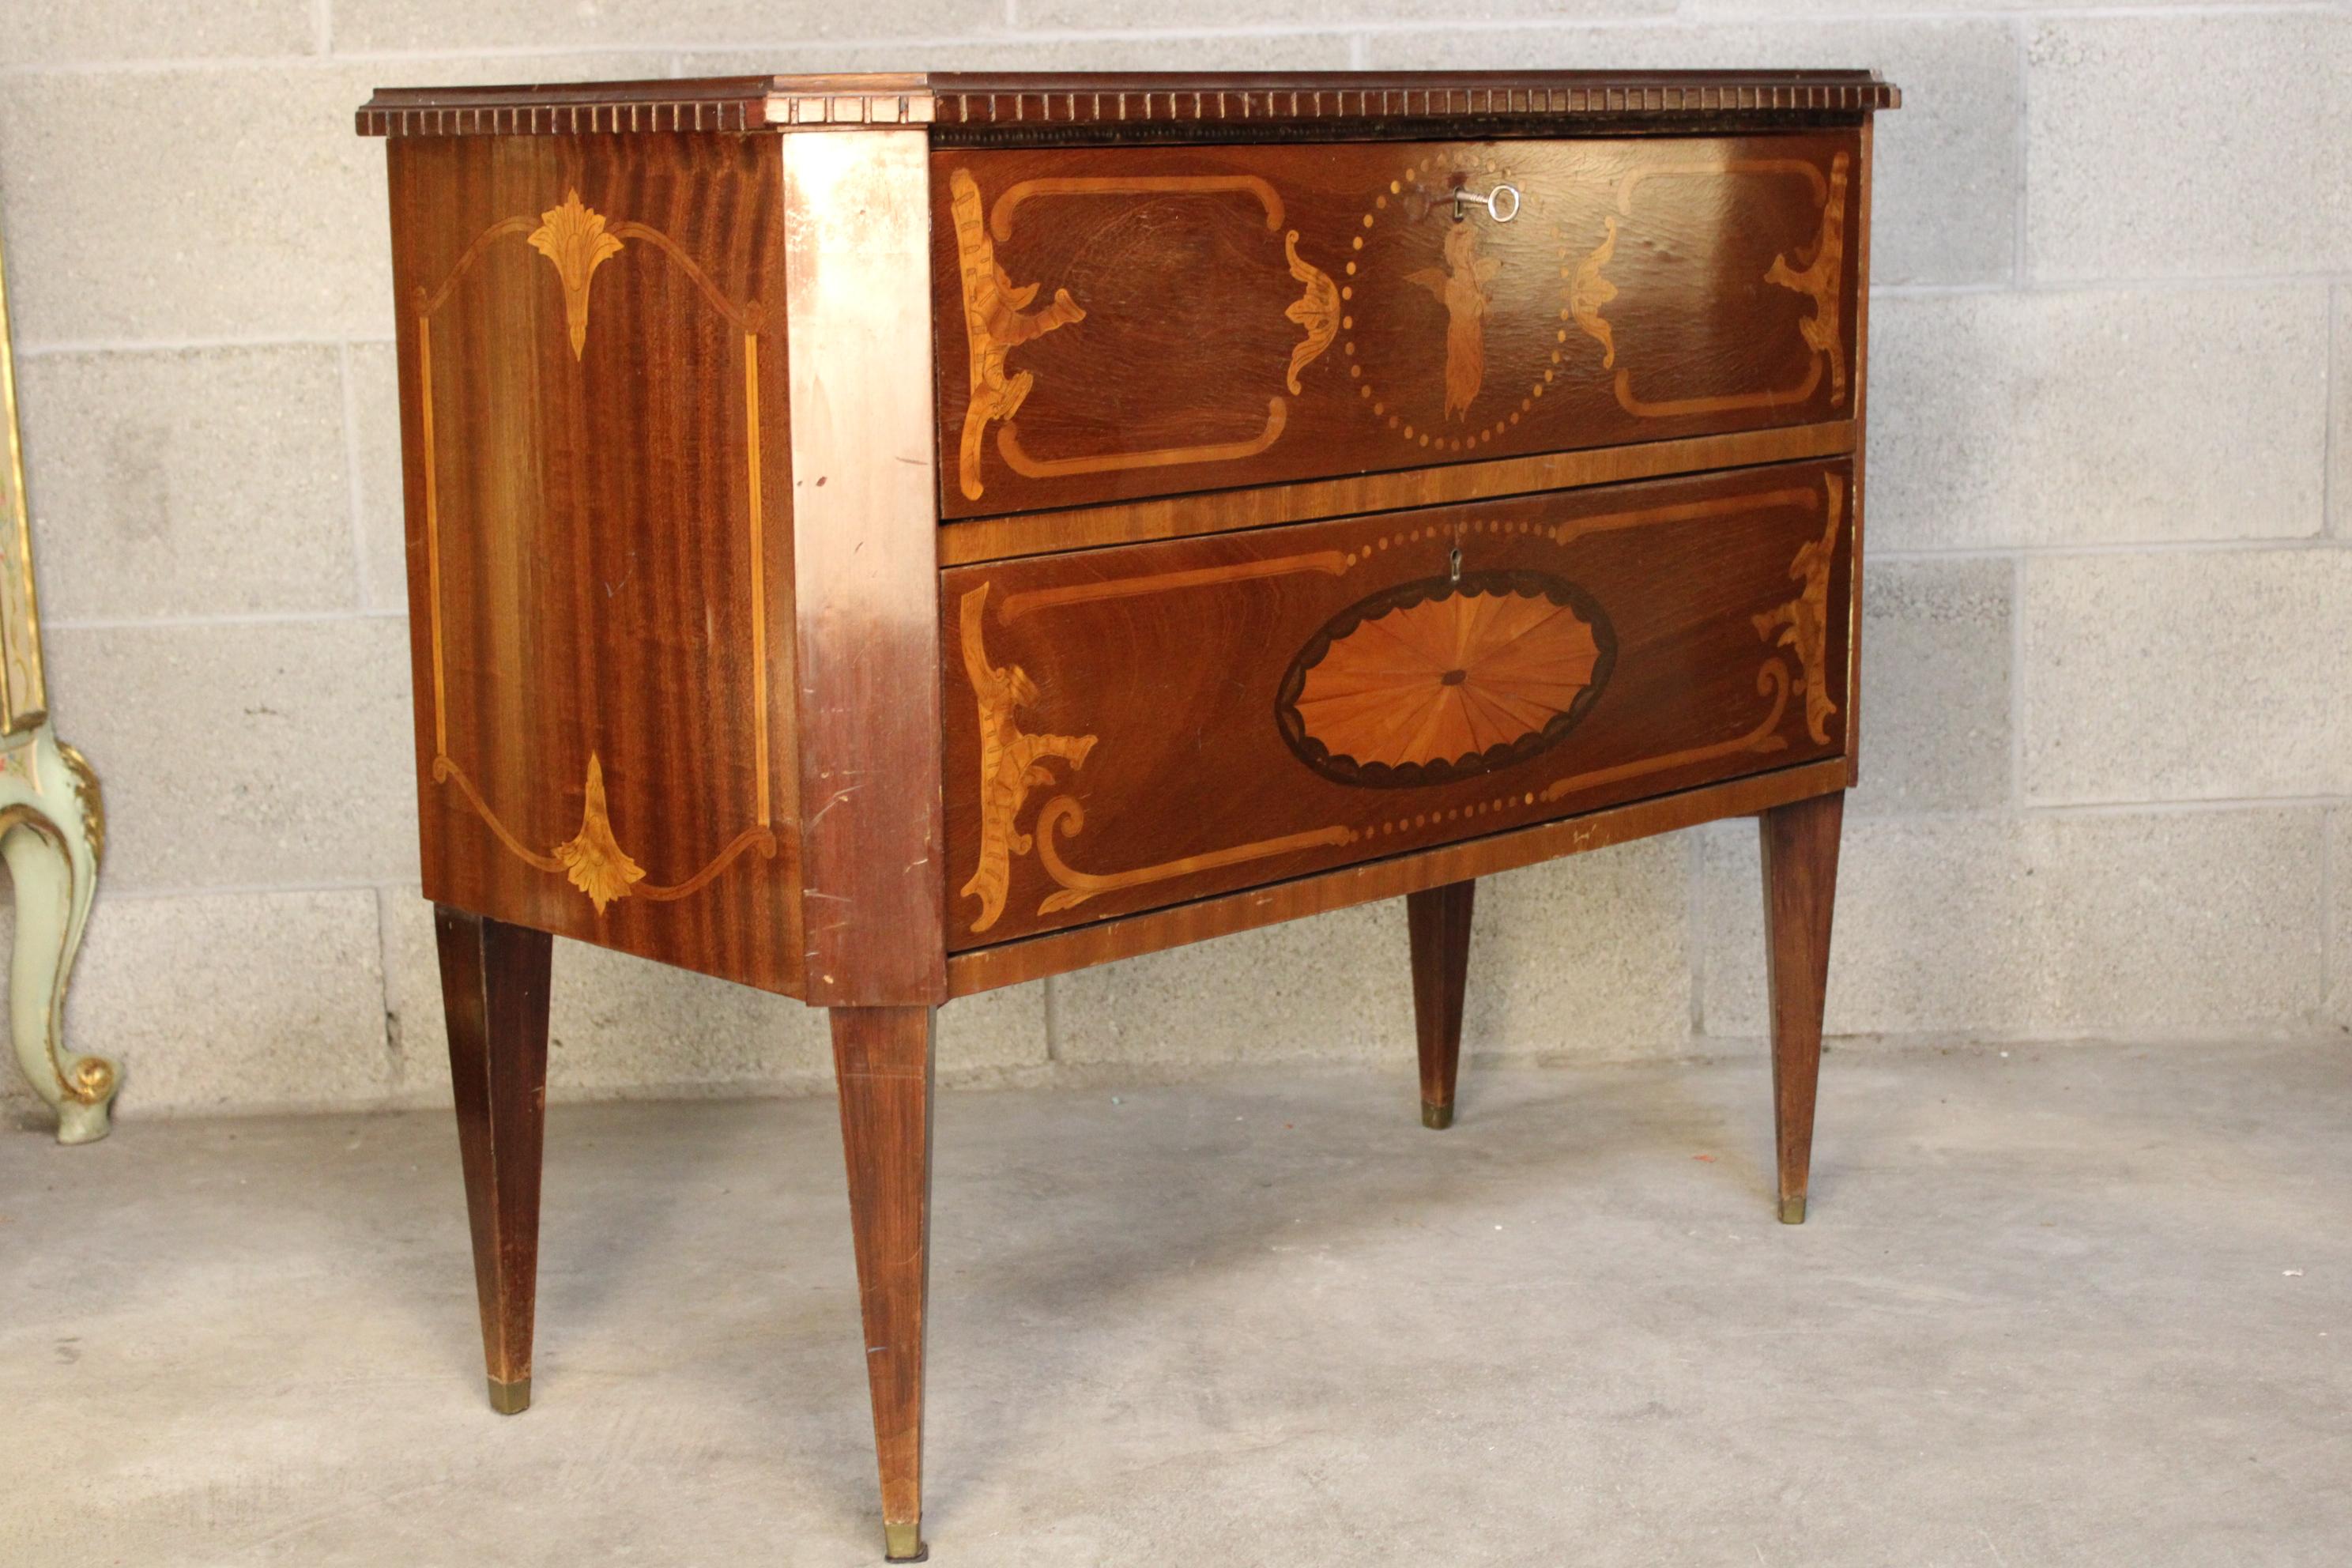 A Swedish Marquetry chest of drawers circa 1880 england in rosewood
rosewood marquetry commode , dresser, 19th century english dresser, victorian period. rich with inlaid work.beautiful piece of art. do not miss this beautiful piece. 
will be